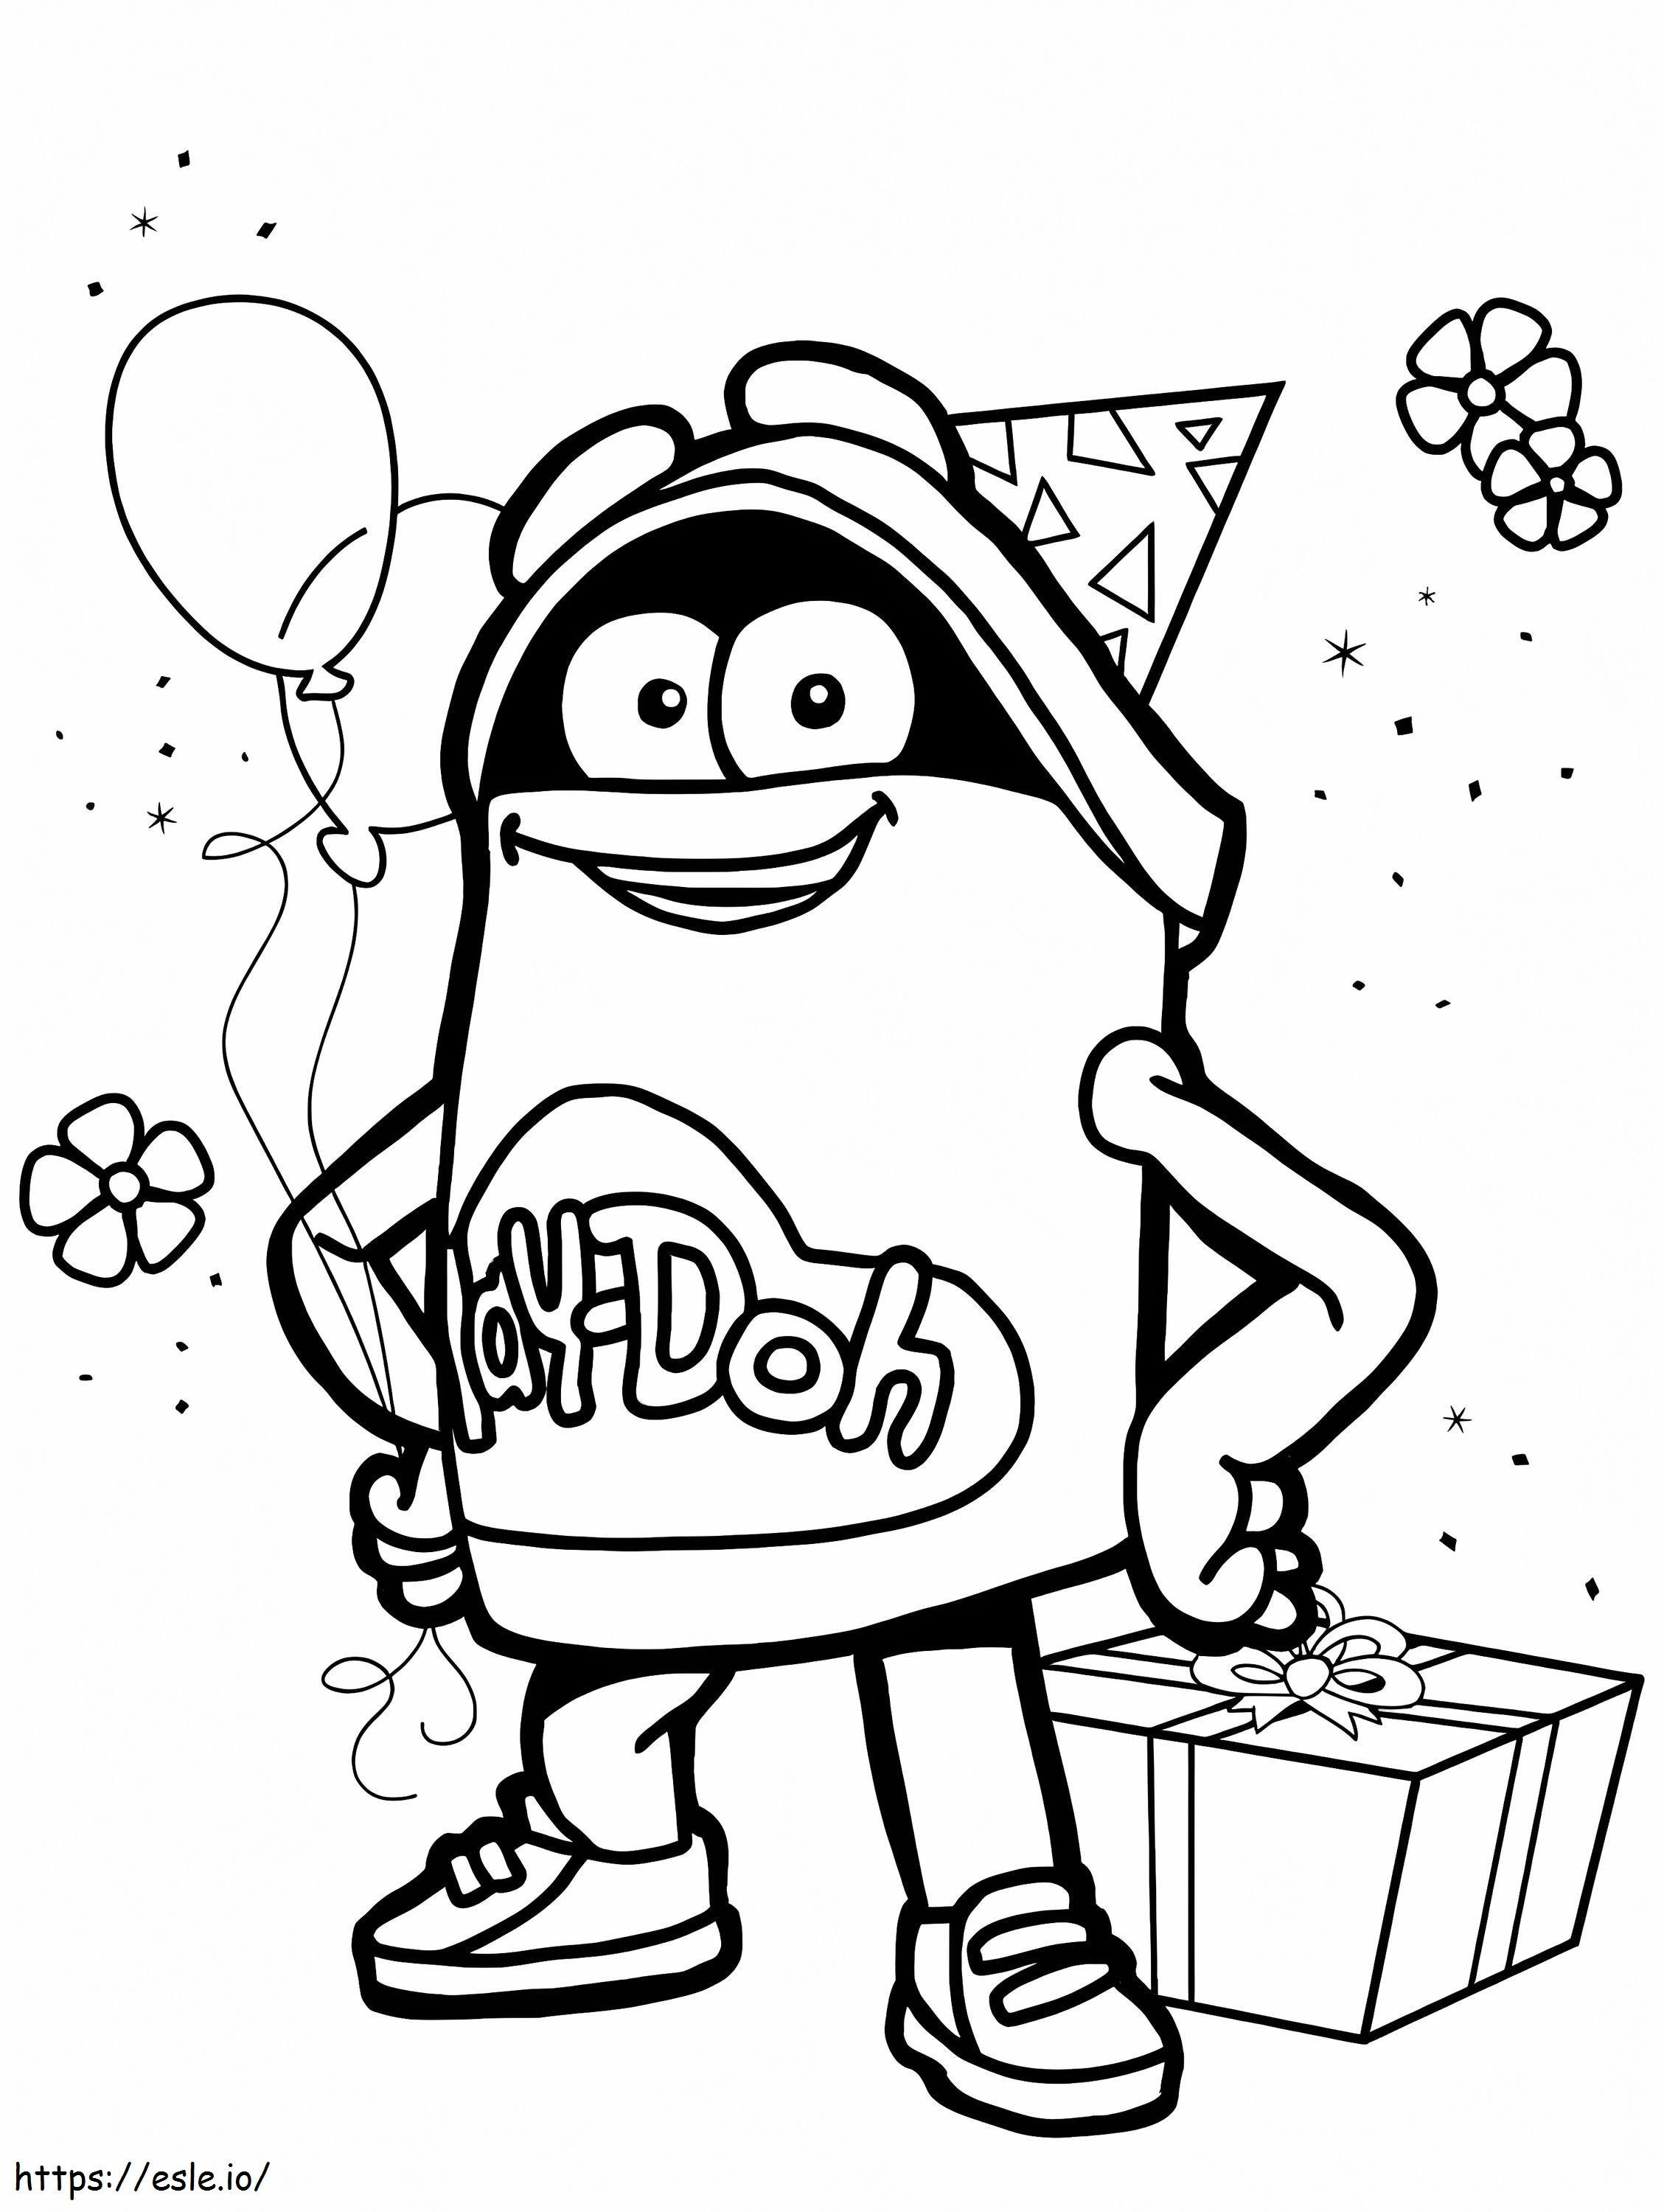 Play Doh 7 coloring page